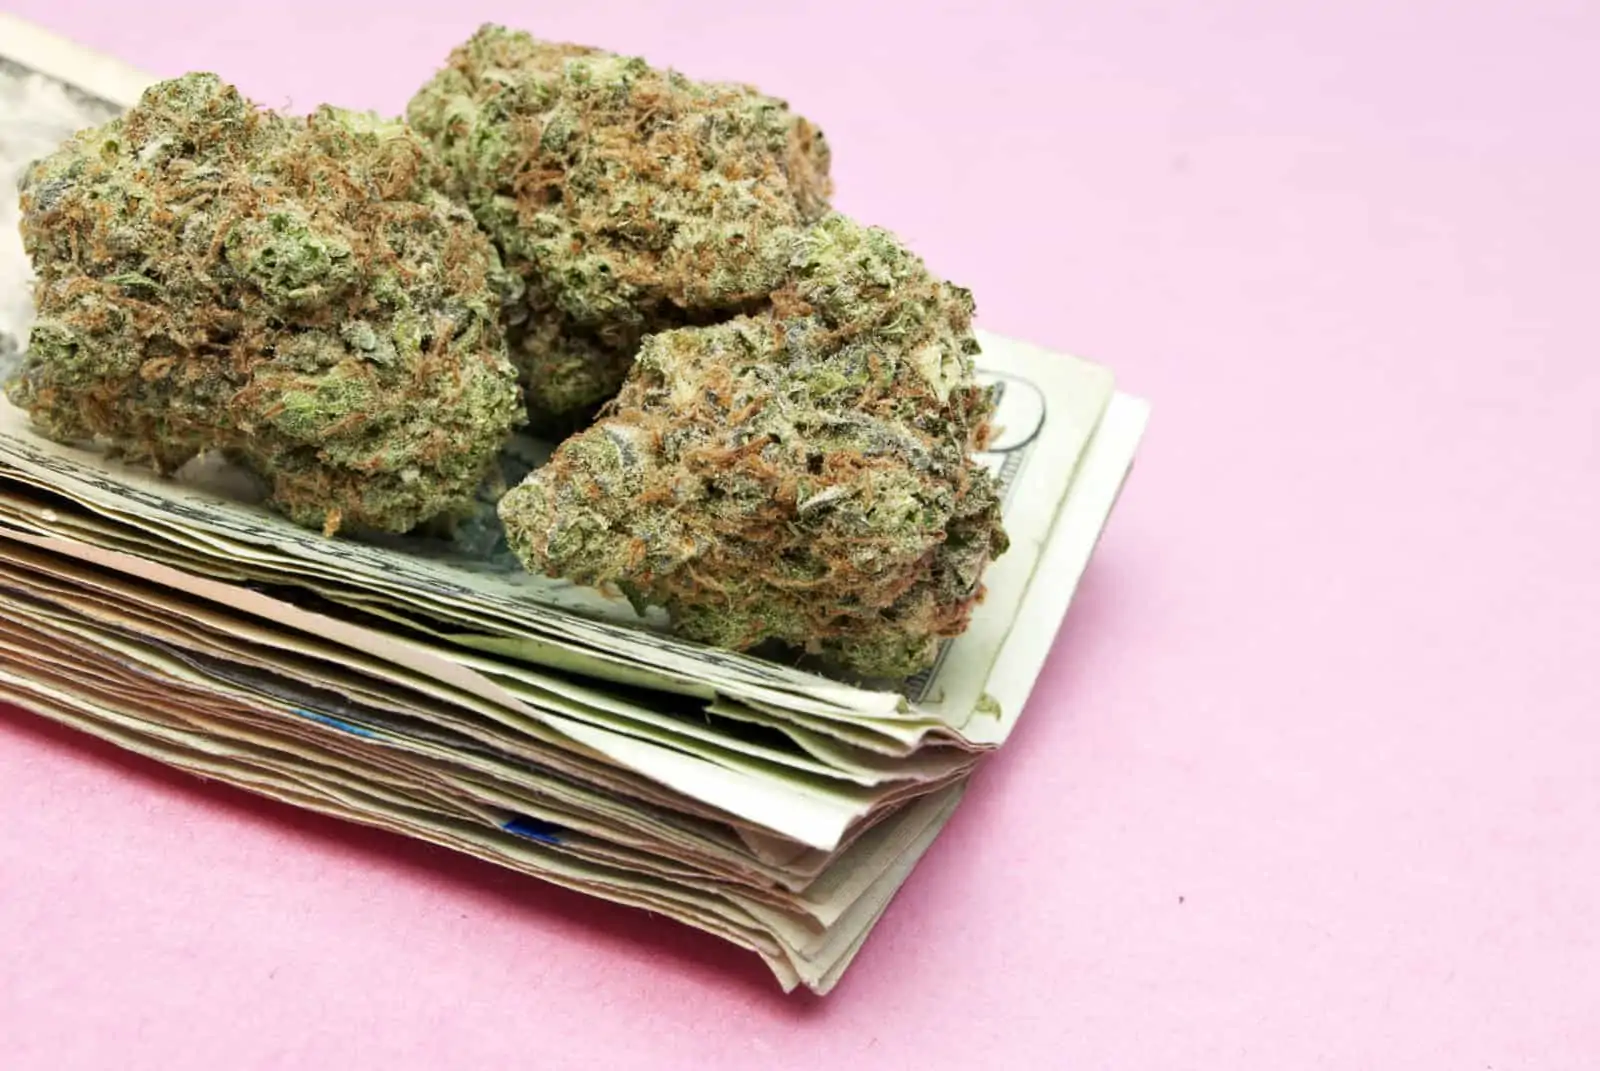 What You Should Know During Your Cannabis Purchase